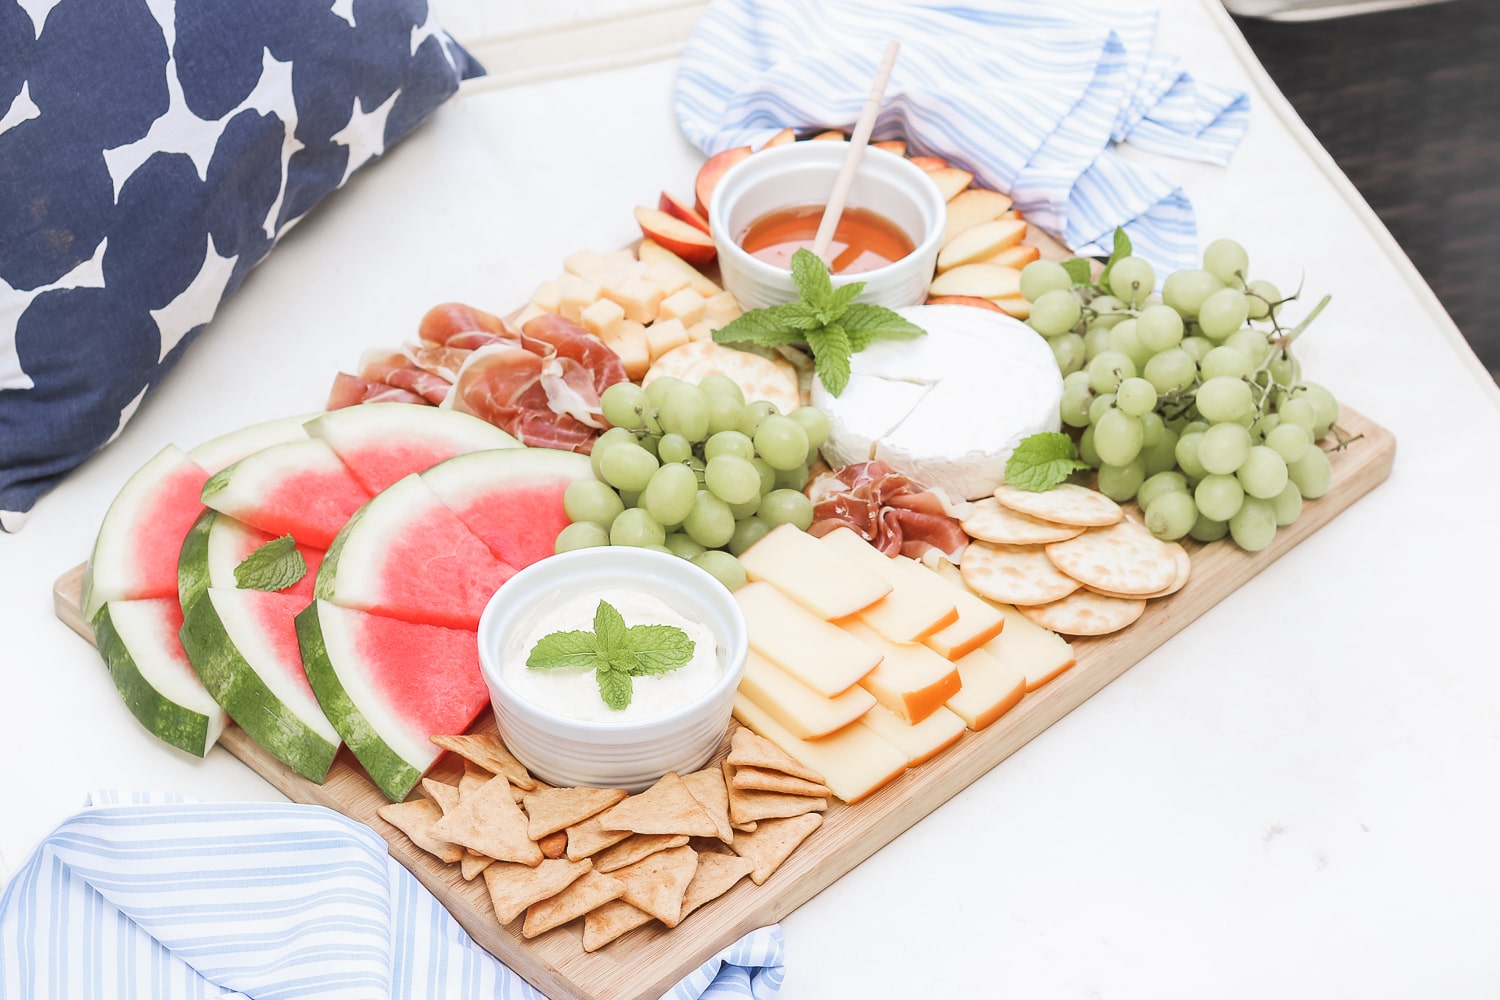 The perfect charcuterie board for summer built by blogger Stephanie Ziajka on Diary of a Debutante